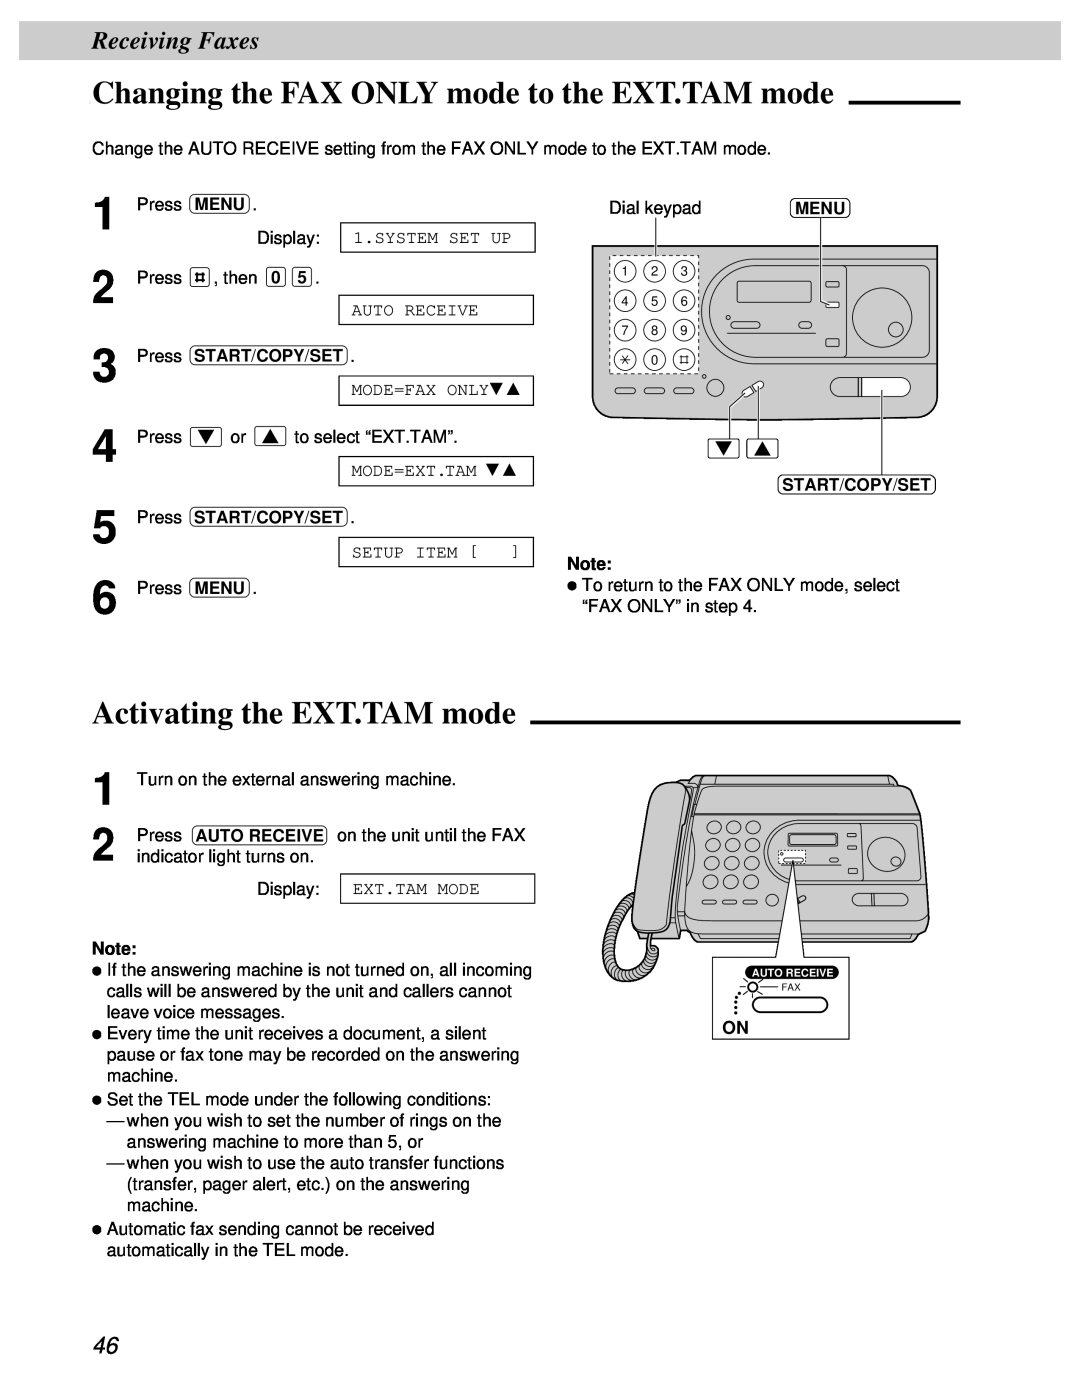 Panasonic KX-FT31BX Changing the FAX ONLY mode to the EXT.TAM mode, Activating the EXT.TAM mode, Receiving Faxes 